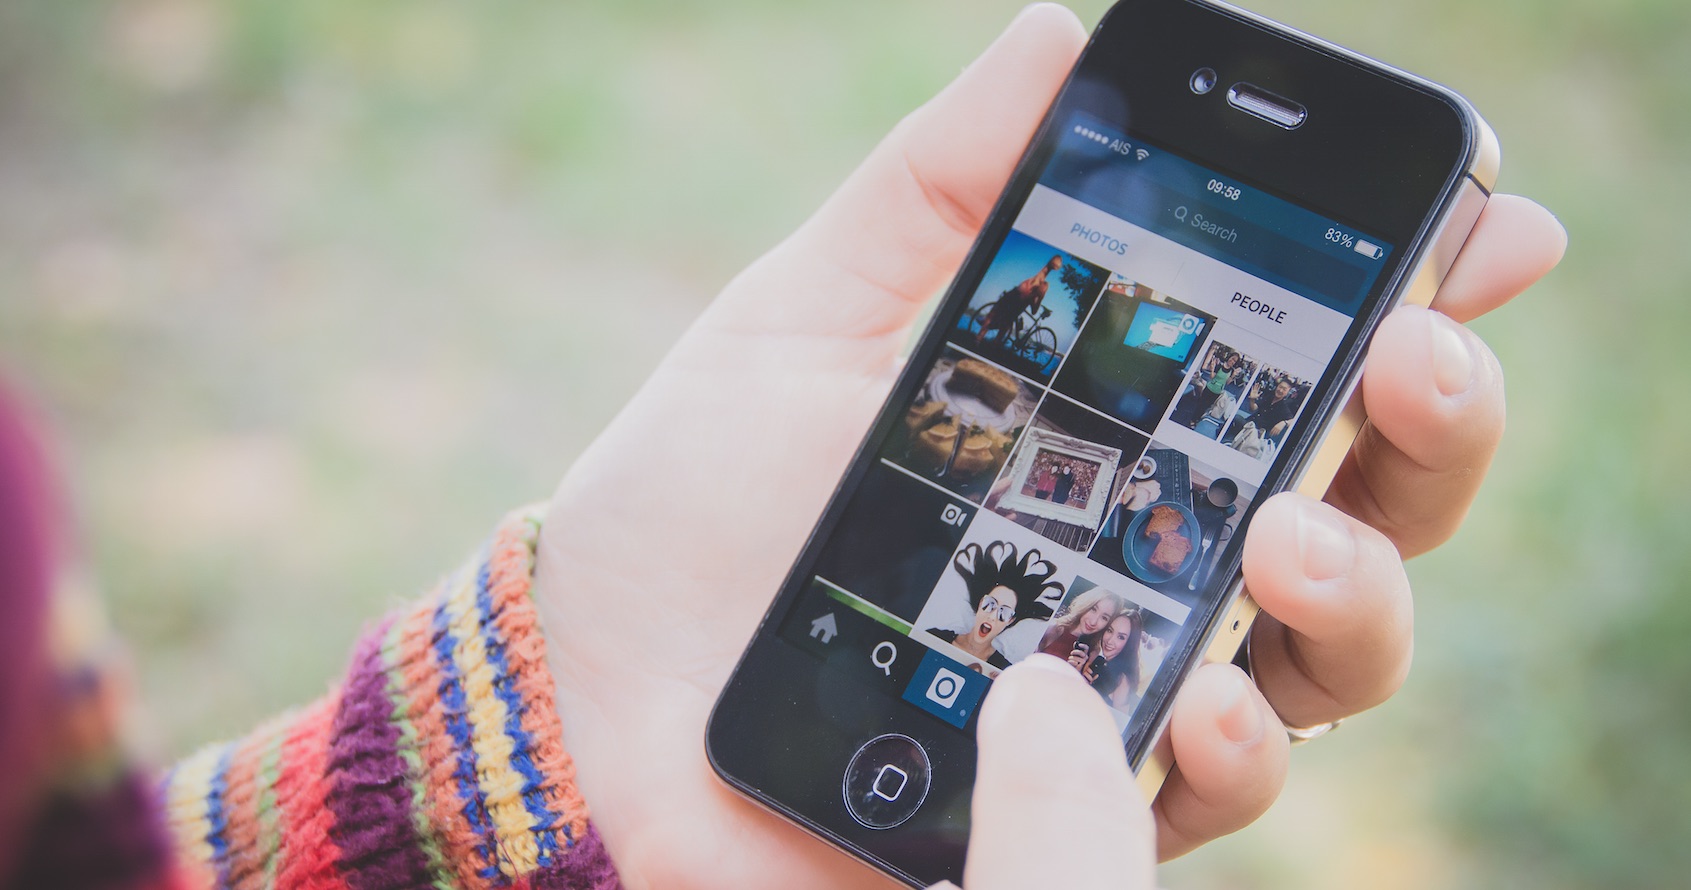 People are really pissed about Instagram's timeline update
